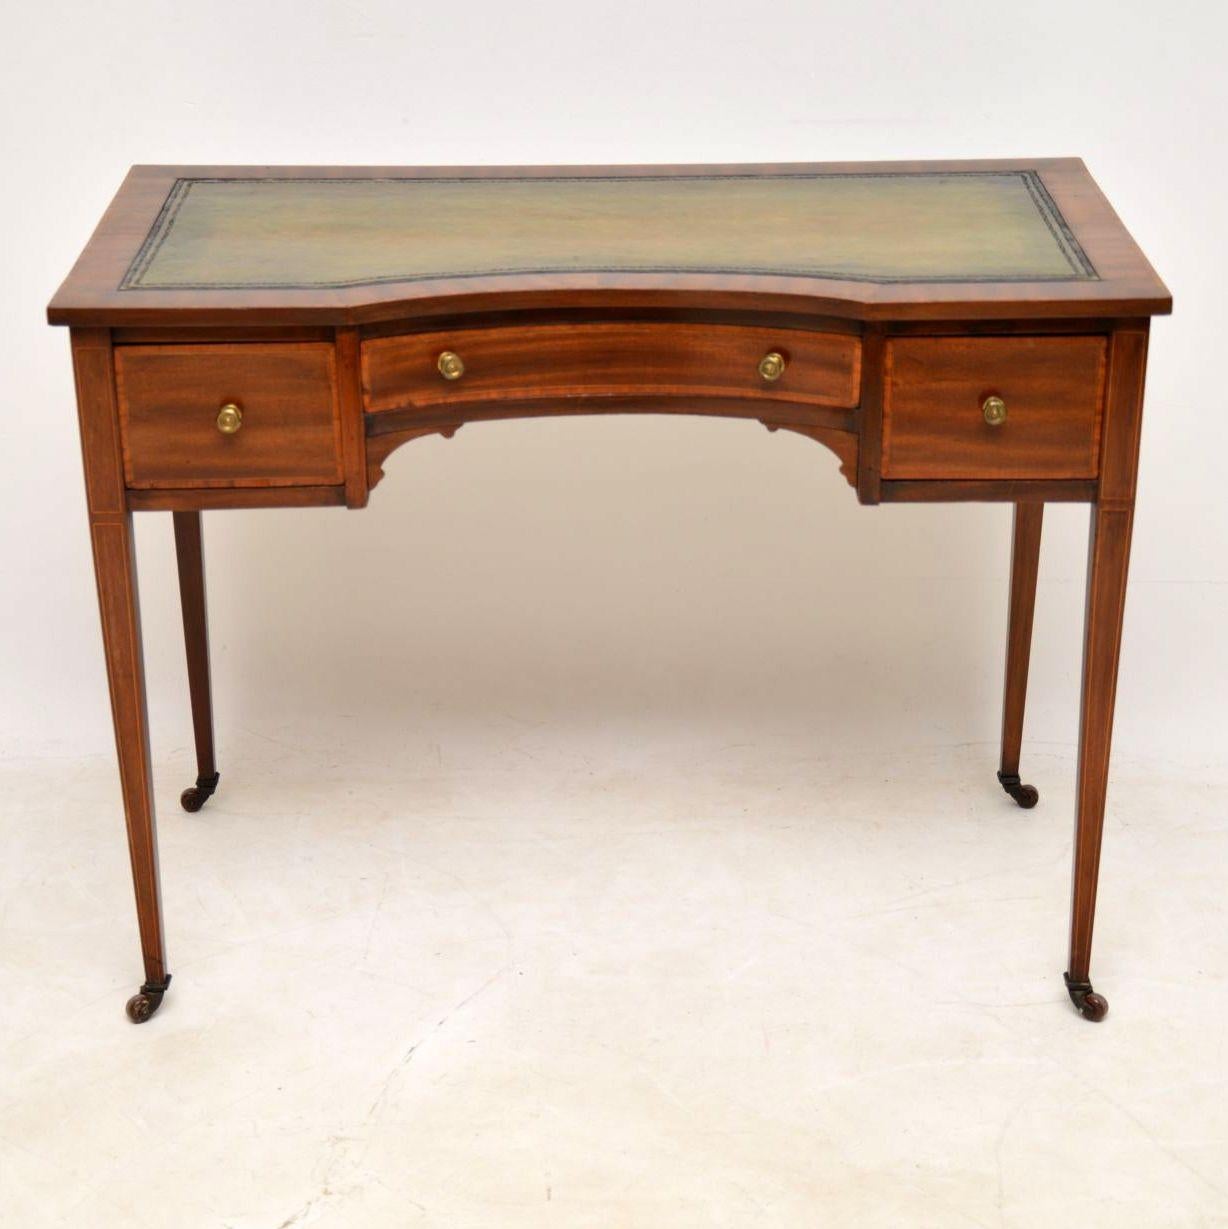 Elegant antique Edwardian mahogany desk with a tooled leather writing surface and some fine satin wood inlays. It has a concave front, three drawers with fine dovetails, original brass handles and porcelain casters. This desk dates from the